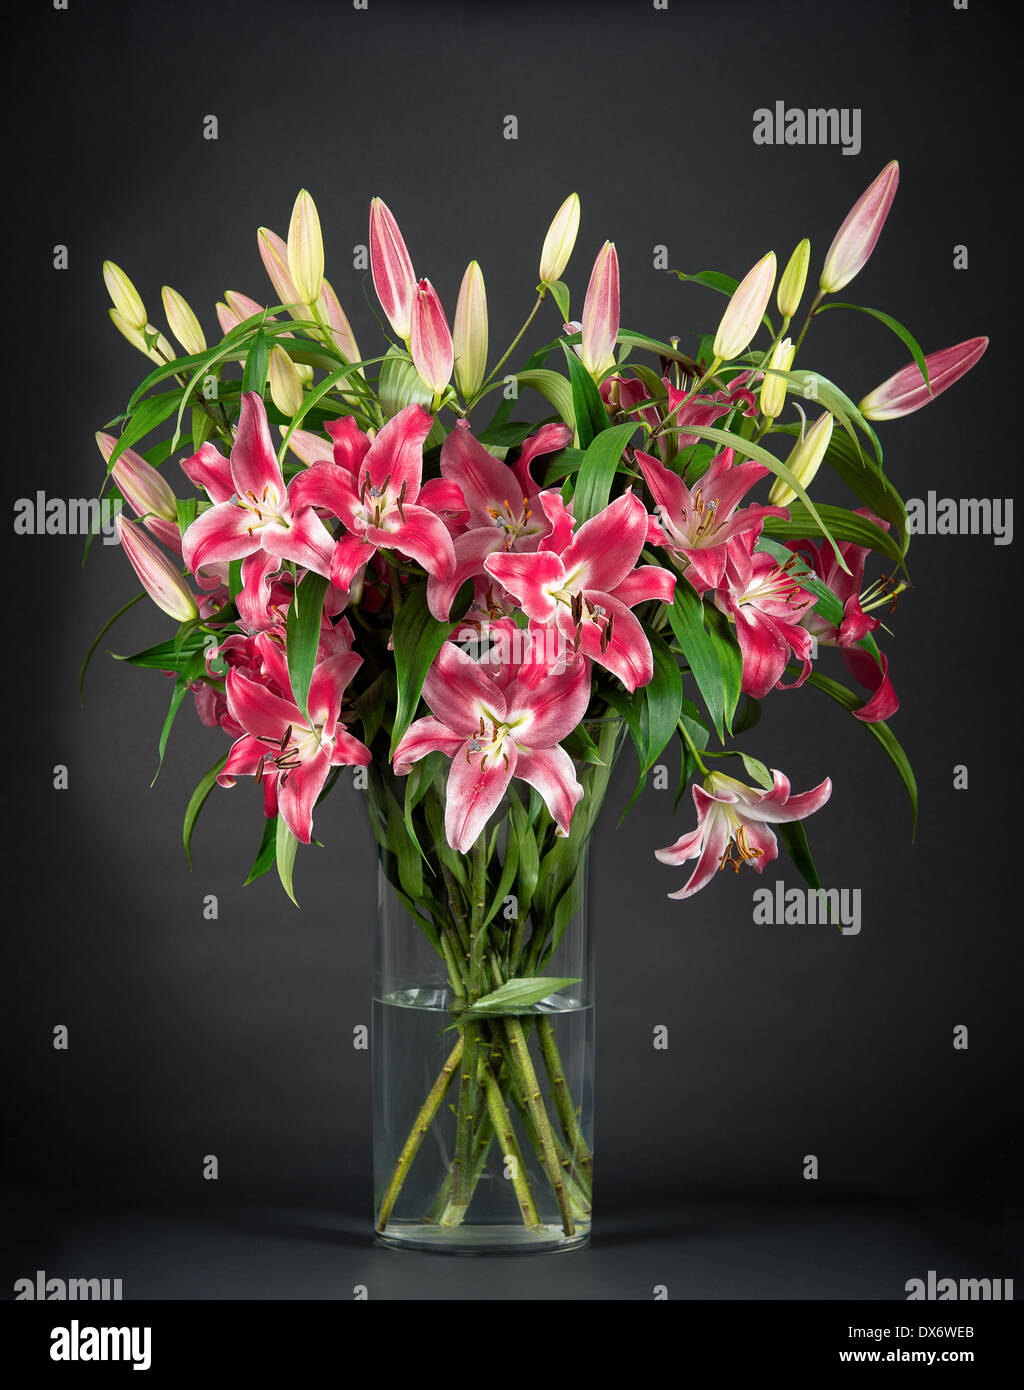 bouquet of fresh lily flowers on black background Stock Photo